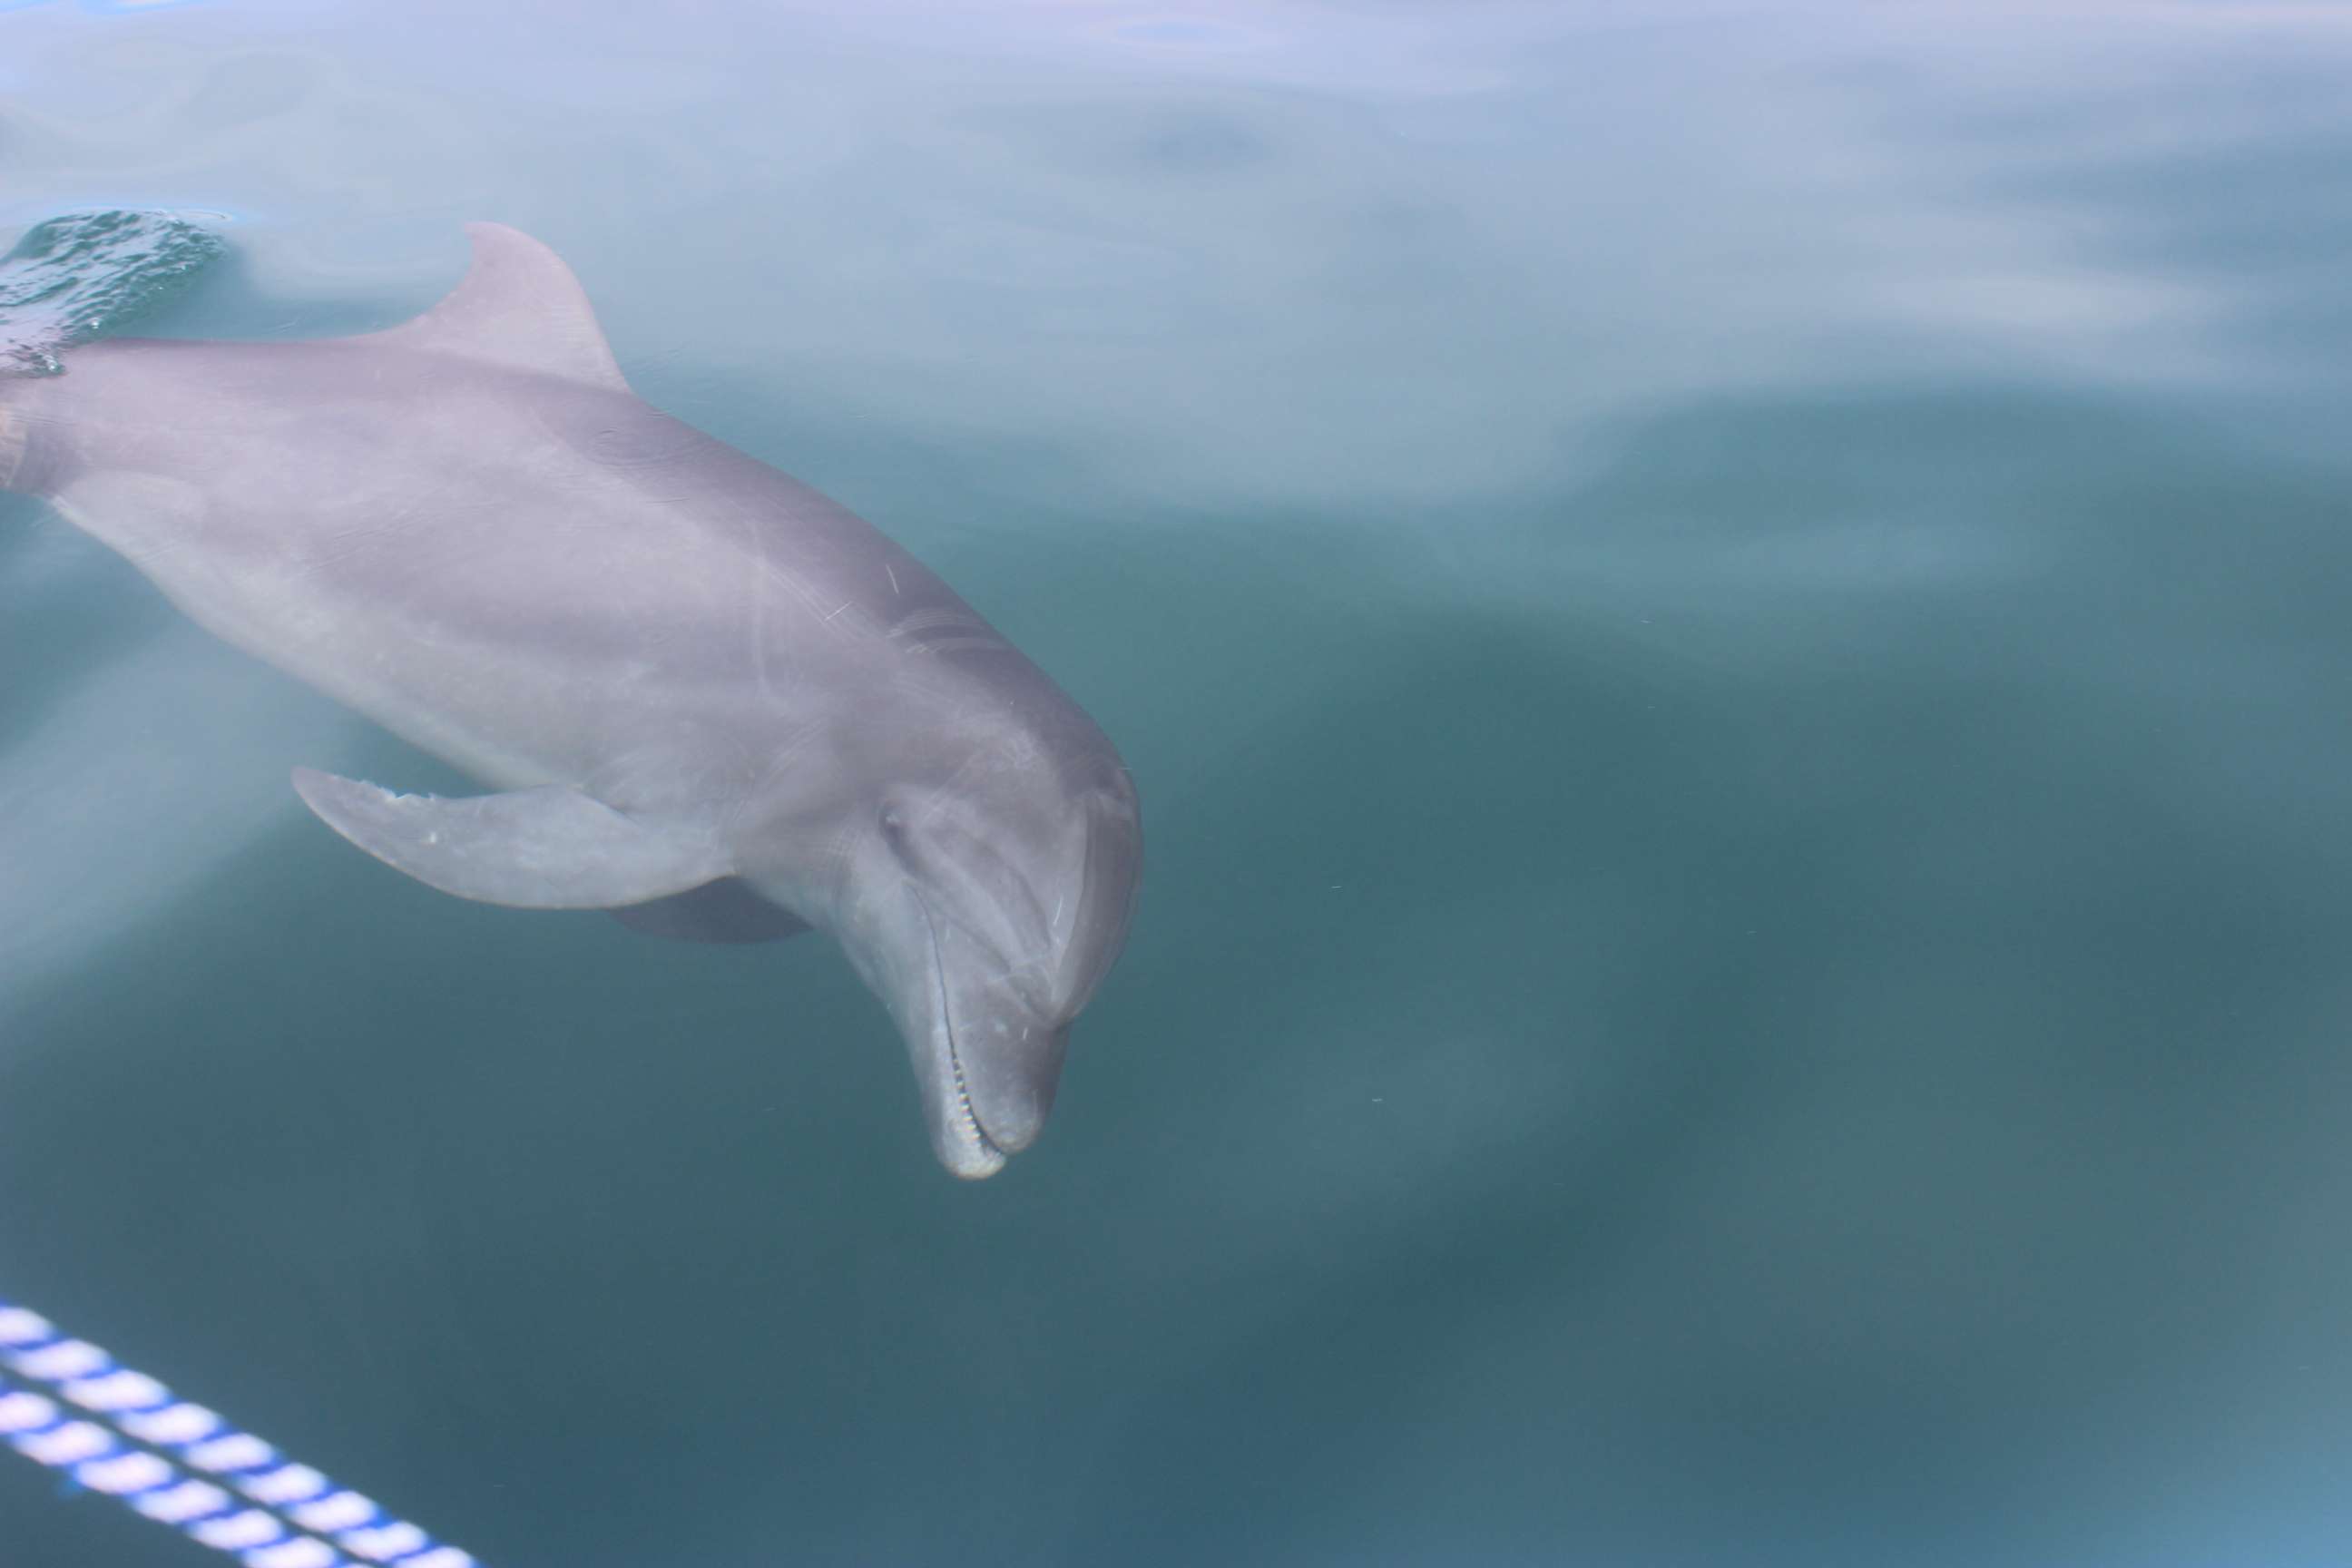 About 25 dolphin and whale species inhabit Costa Rica's oceans. © WWF-US/Abby Wadley